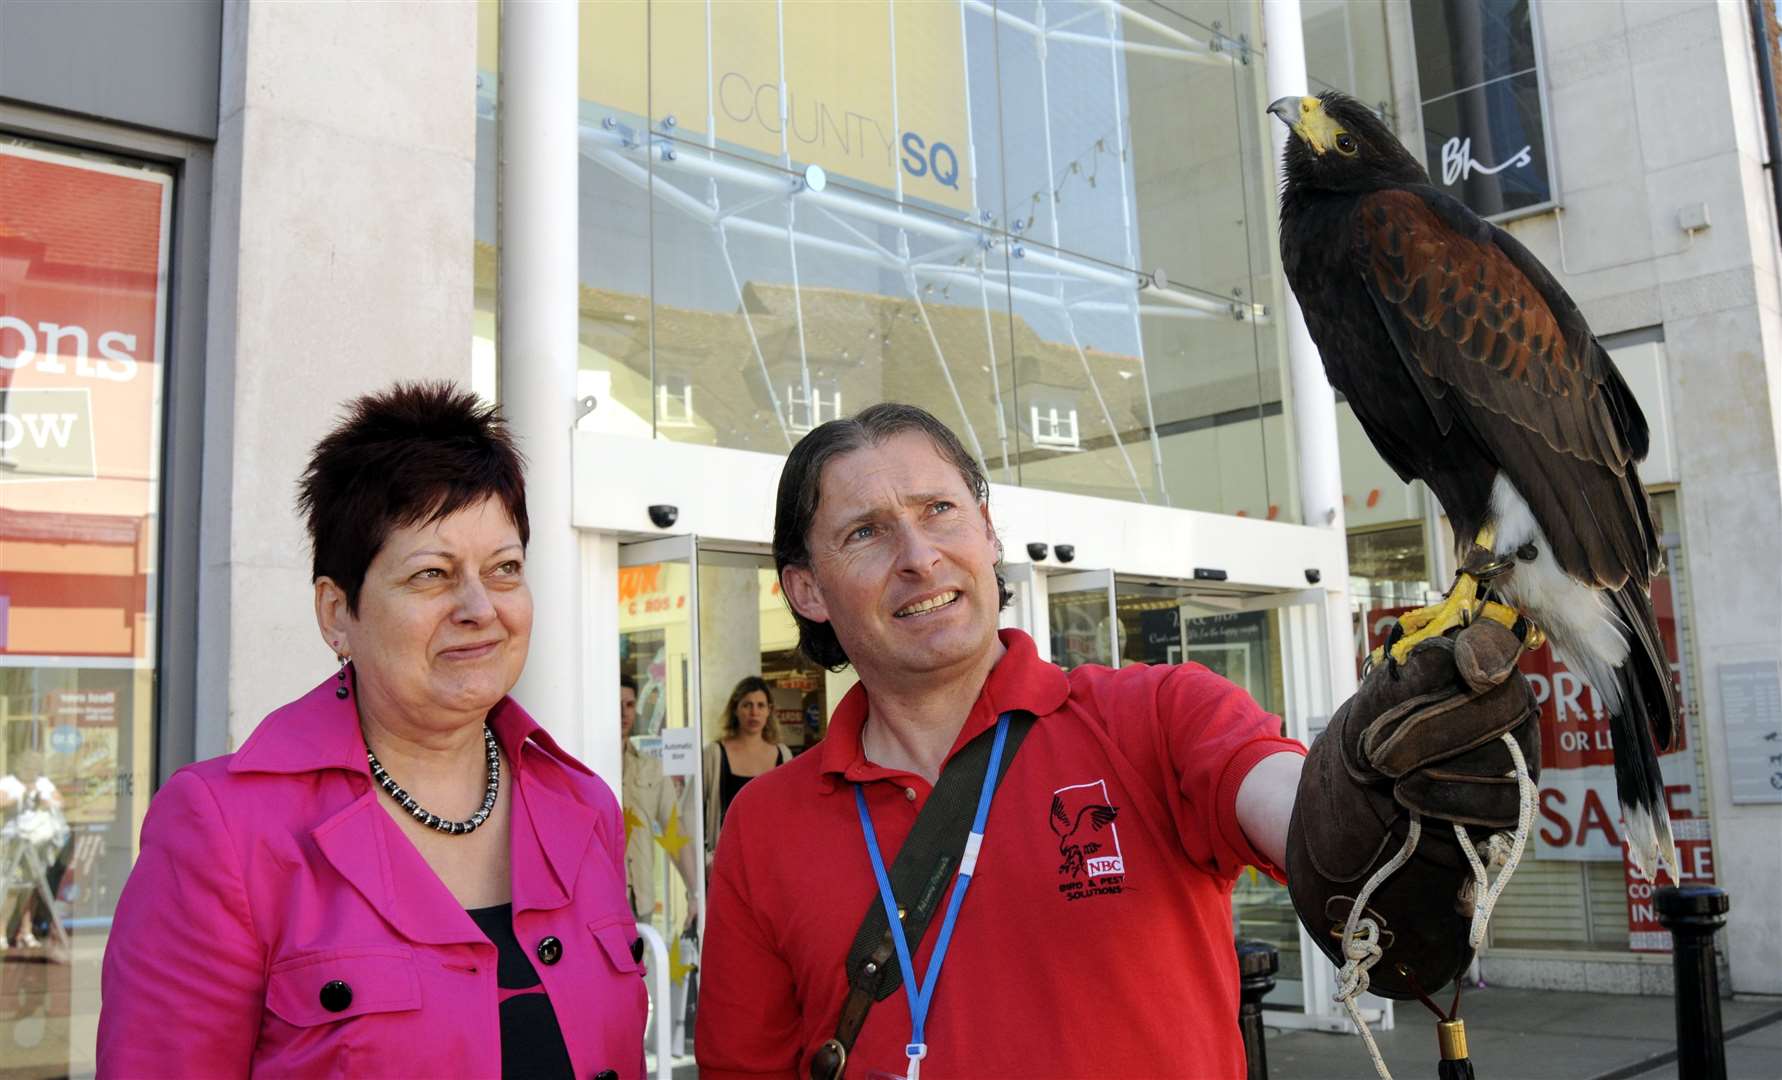 County Square bosses used a hawk in 2010 - this picture shows center manager Frances Burt with Gary Railton and a male Harris Hawk